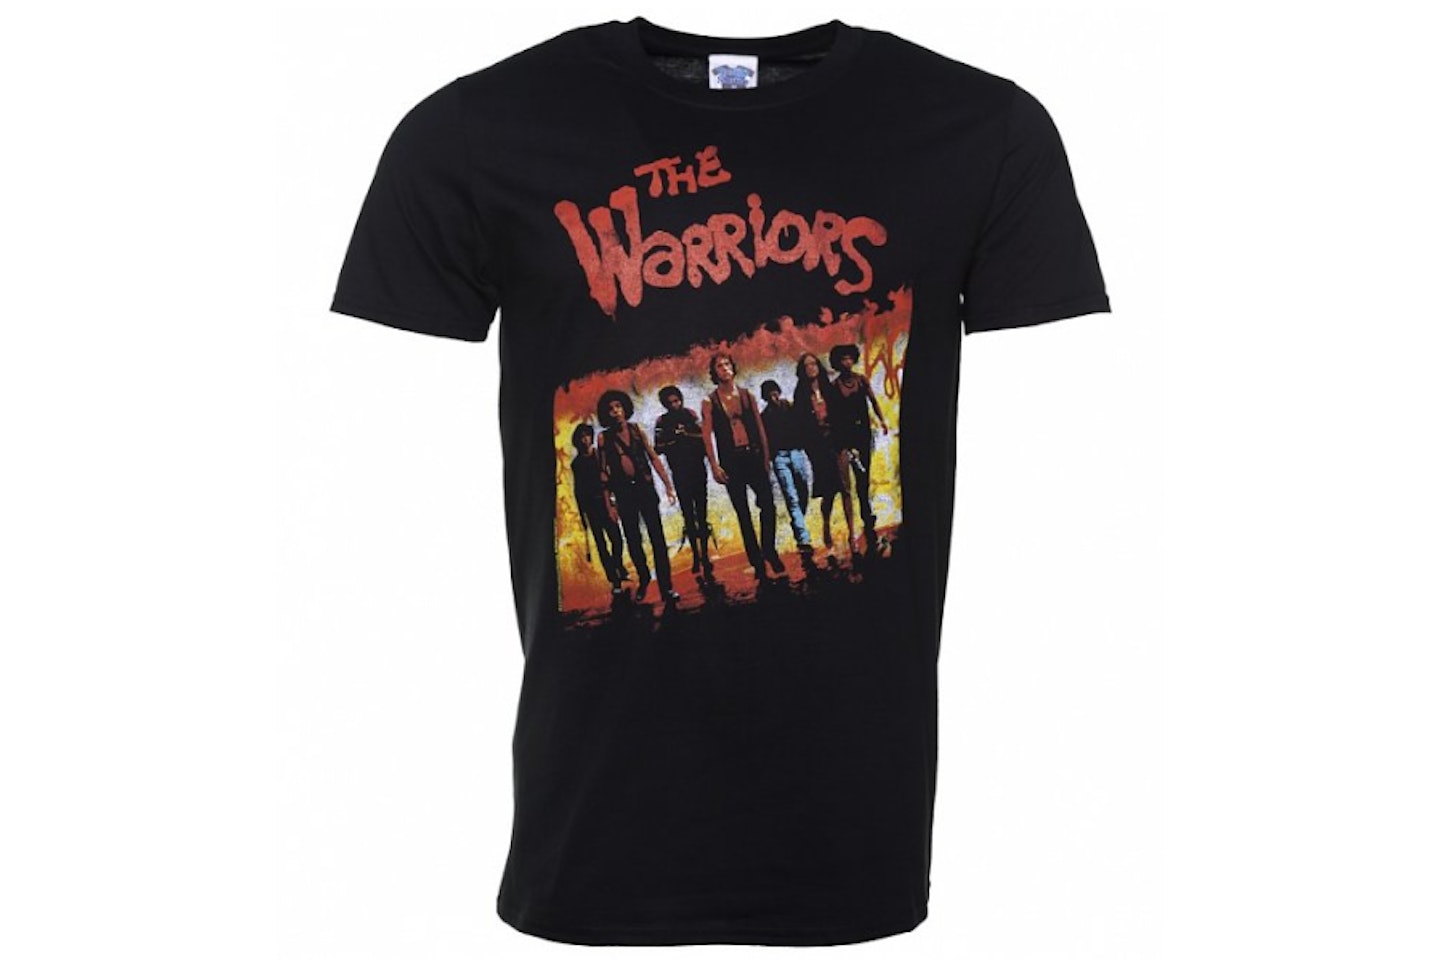 The Warriors Movie Poster T-Shirt, £14.99